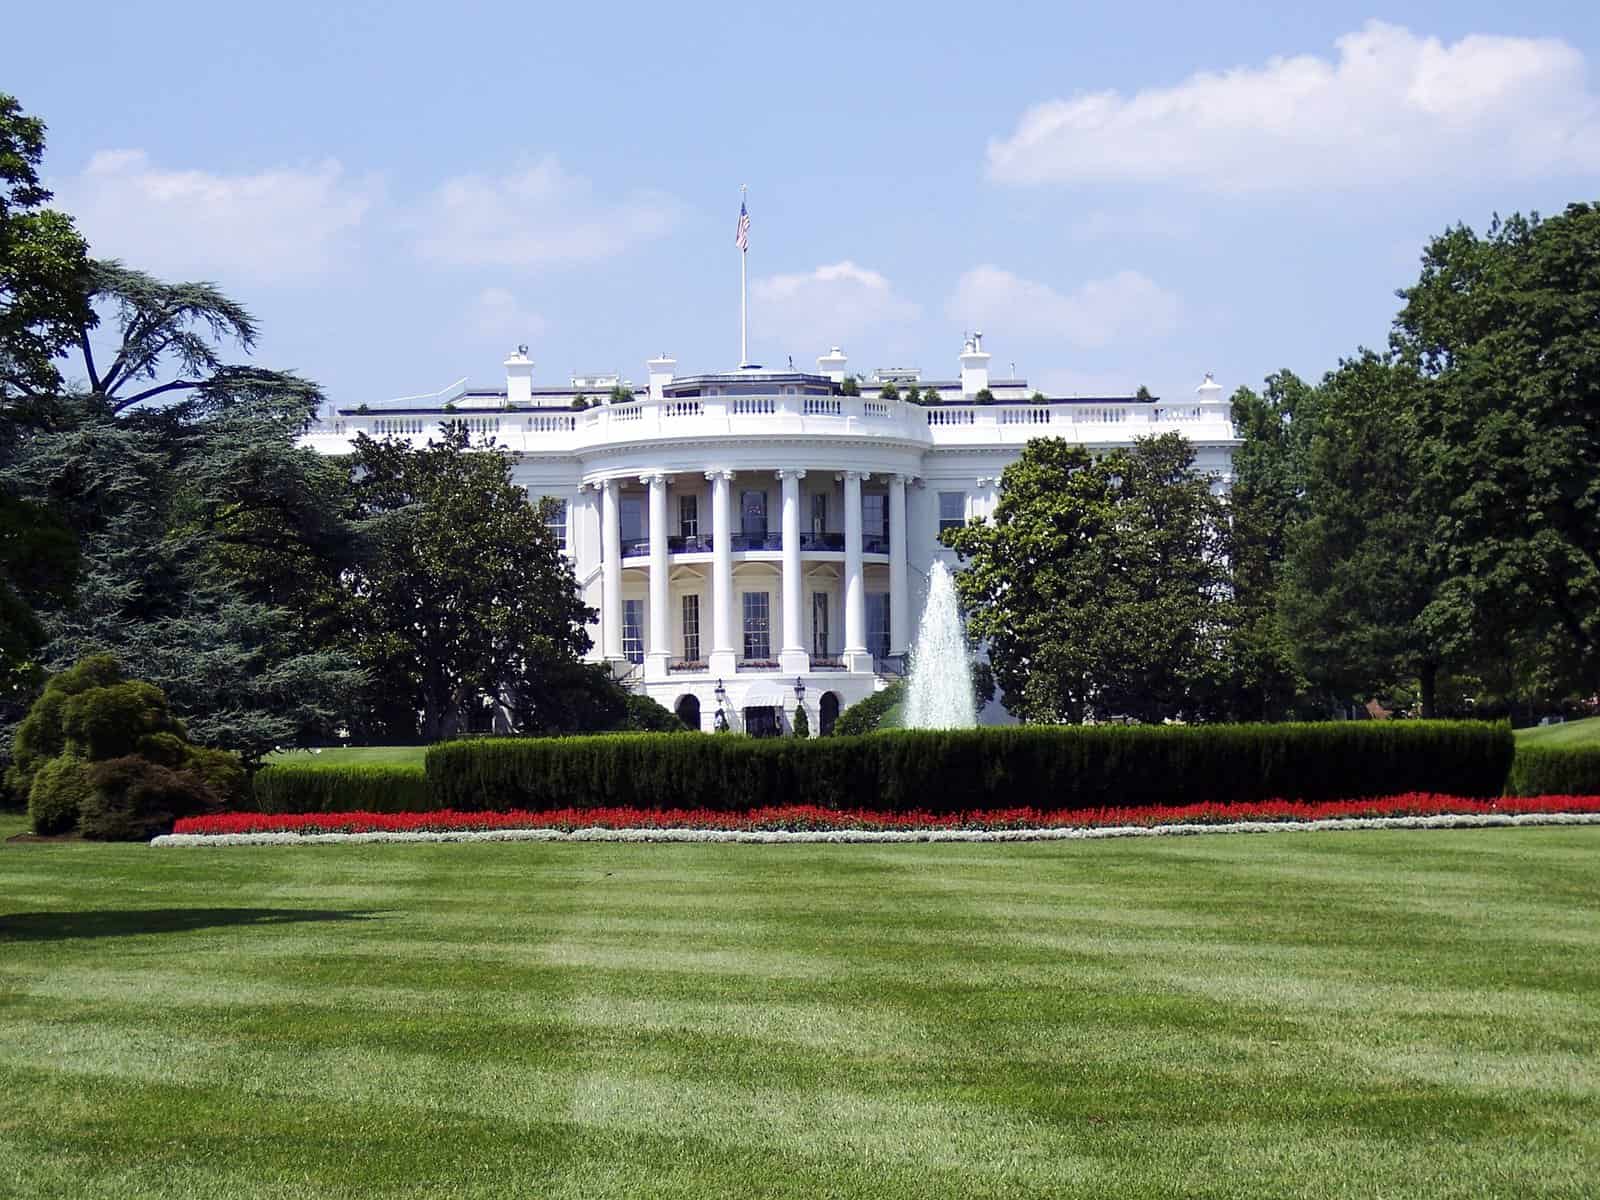 The White House is shown at a distance across a green lawn.